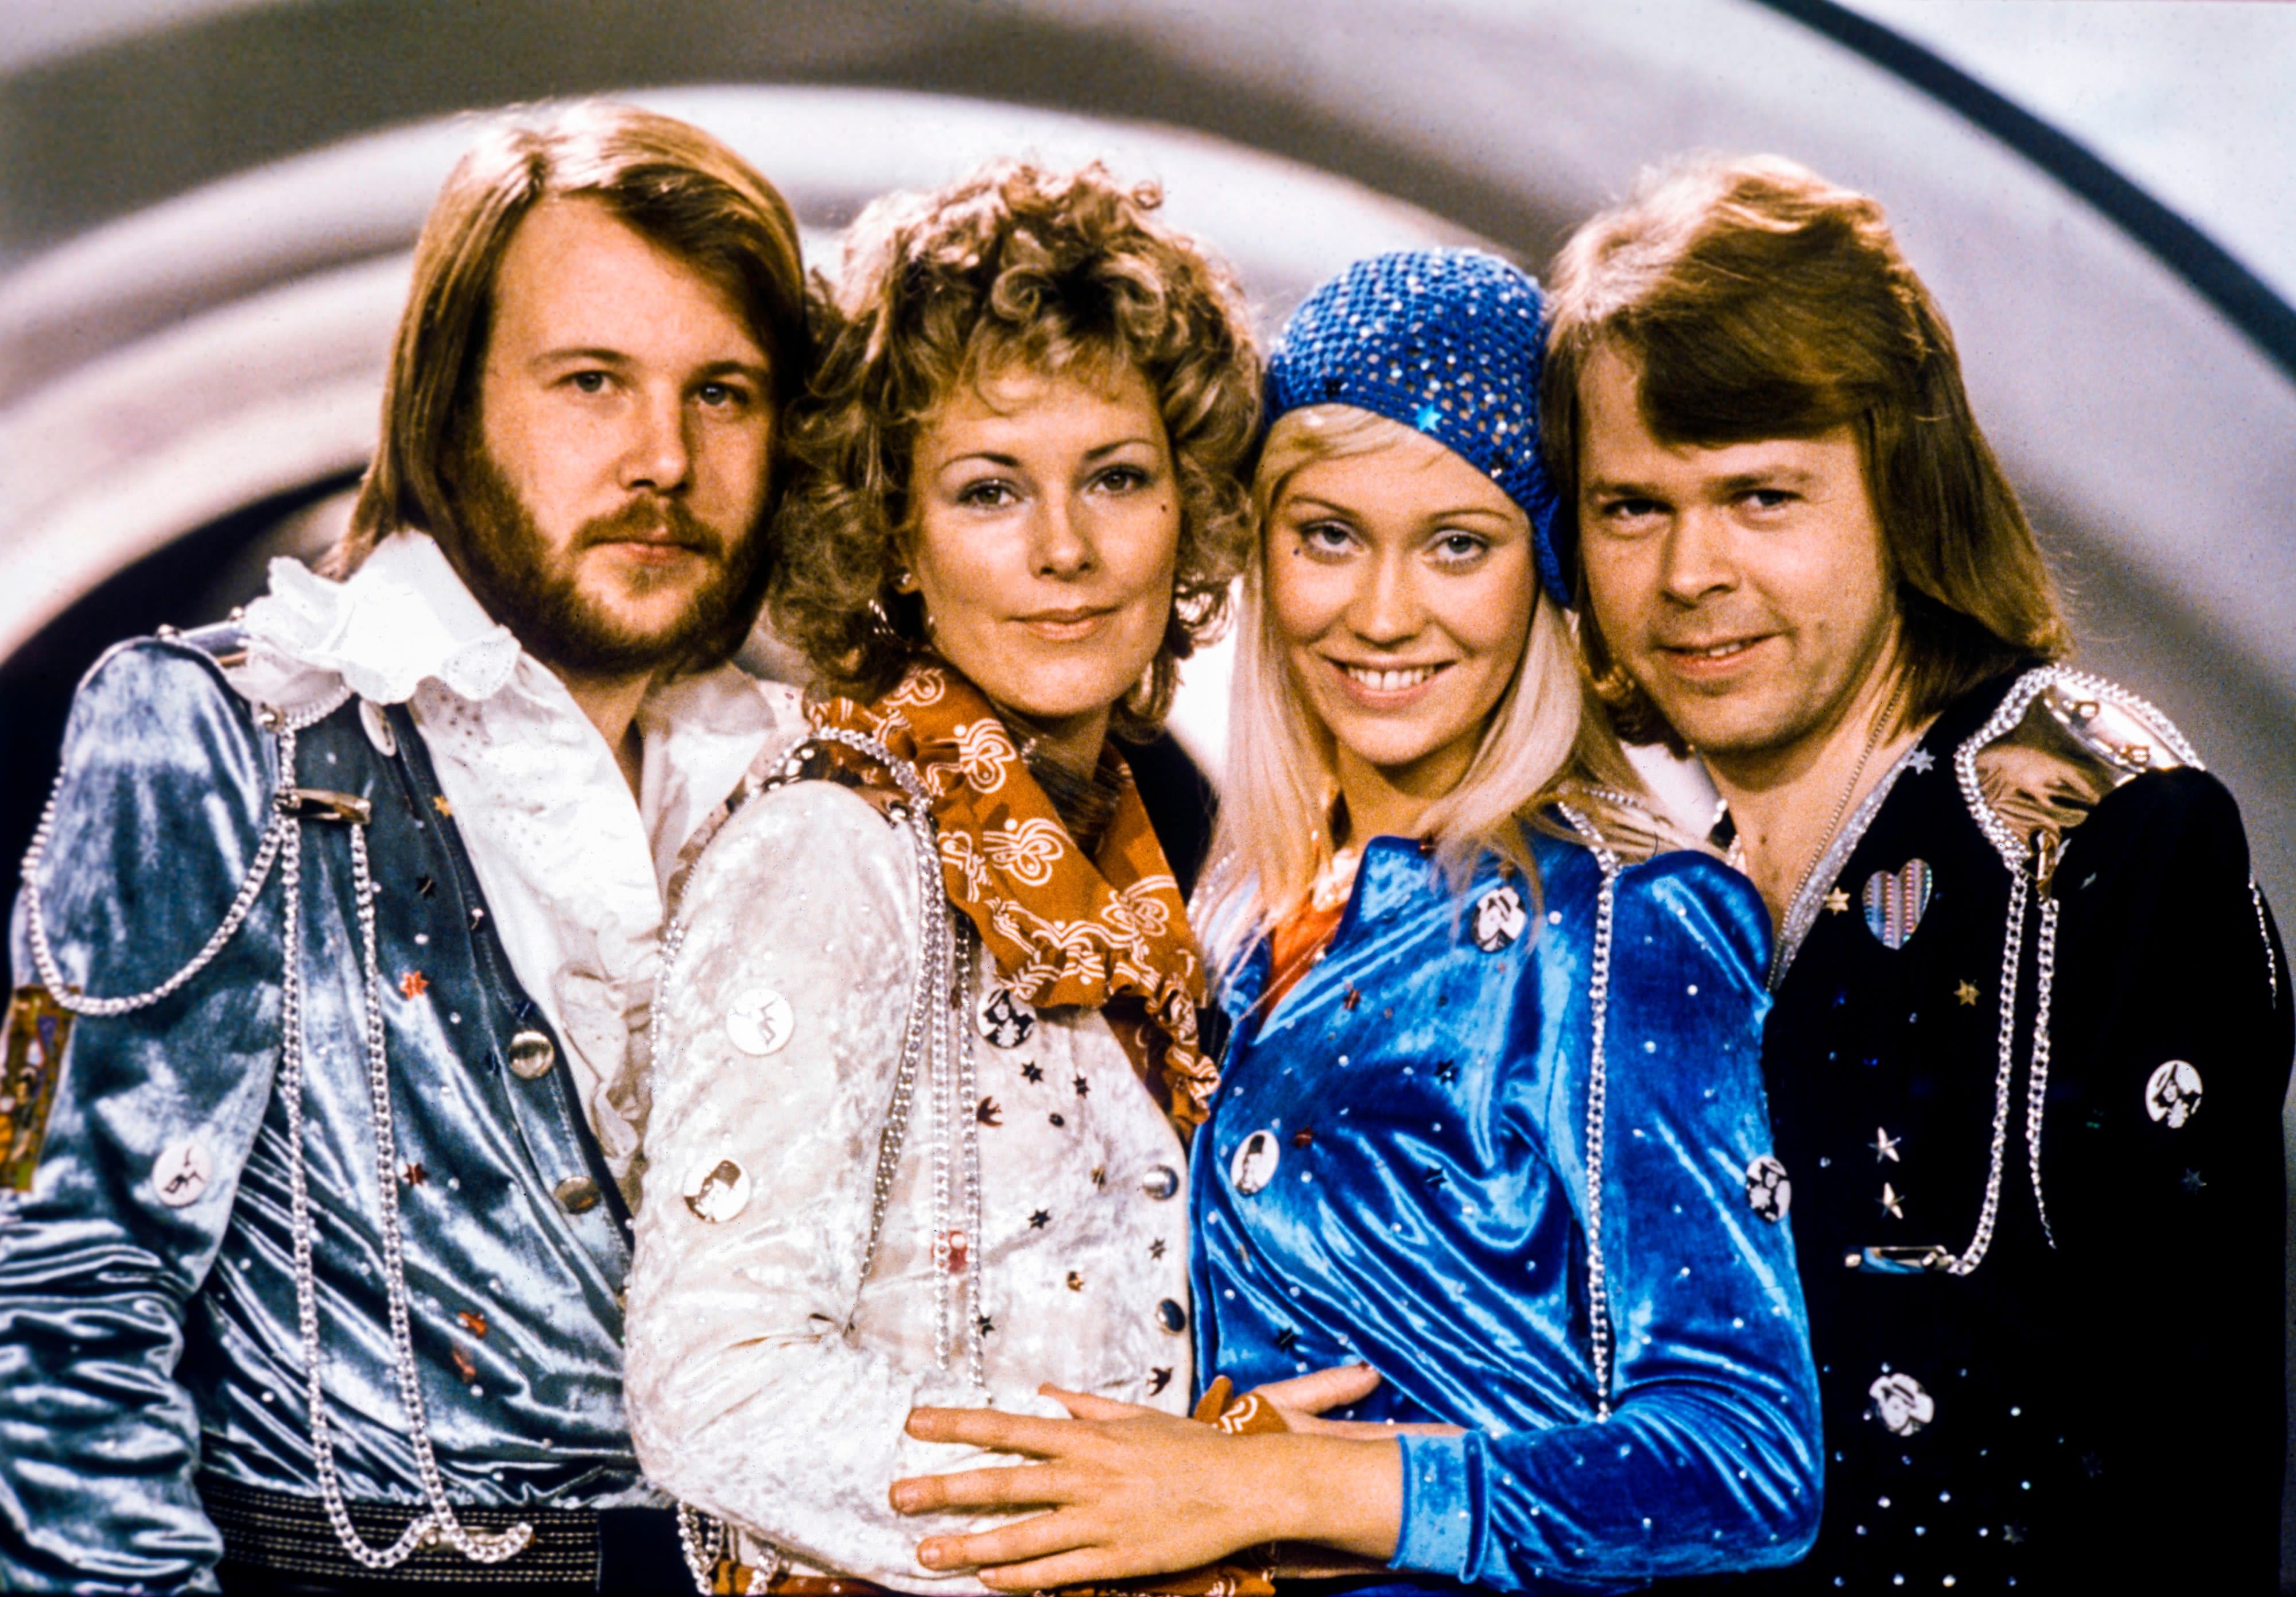 Sweden celebrates ABBA at this year’s Eurovision Song Contest